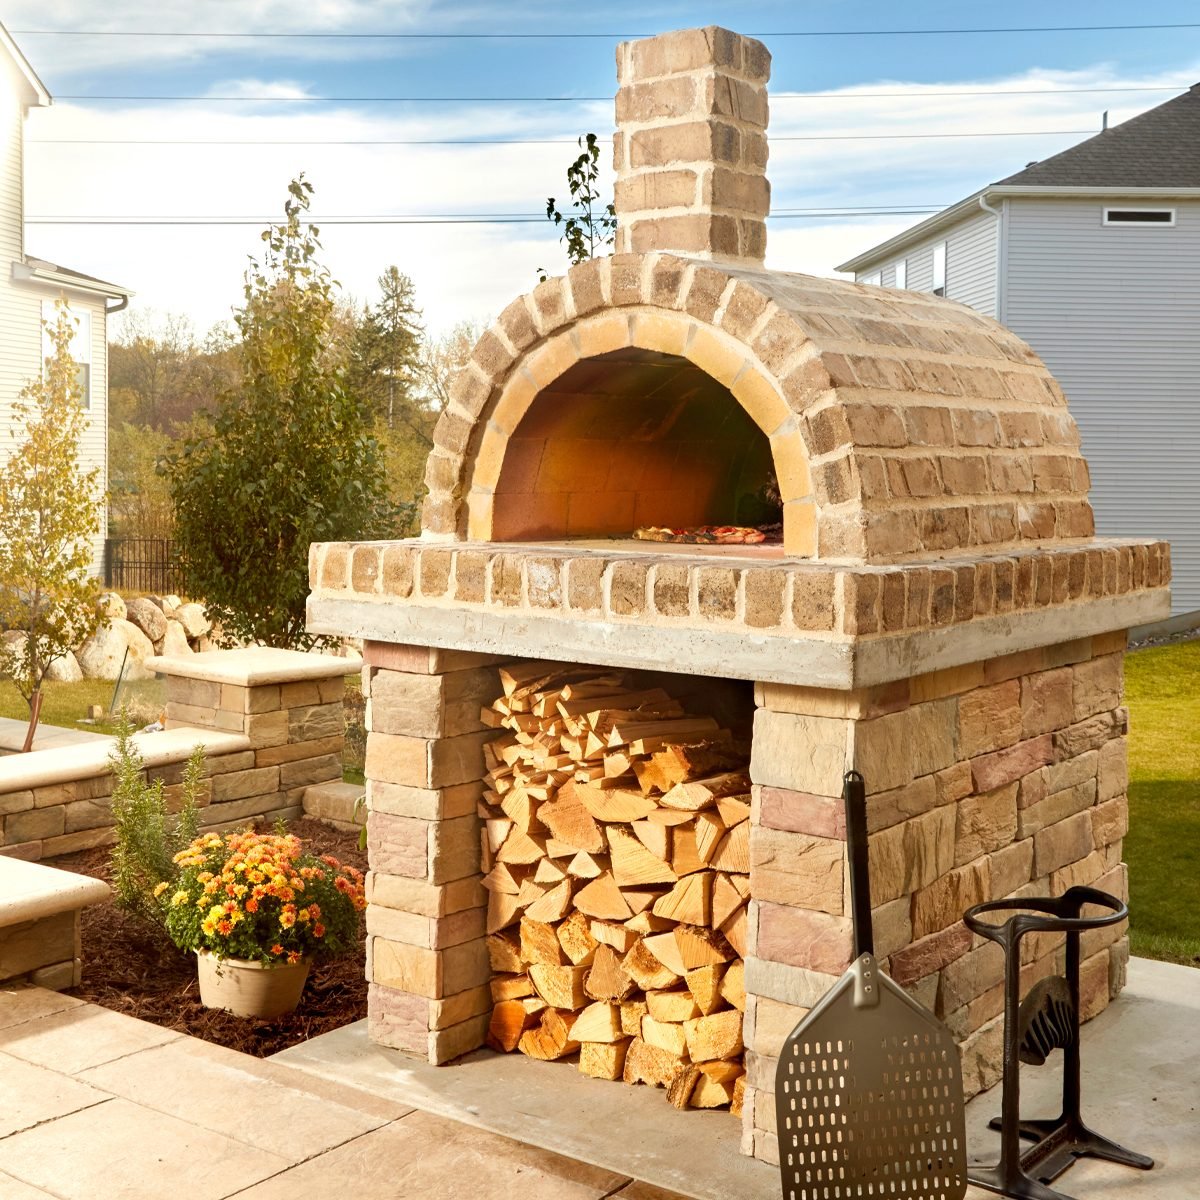 The Best Bricks For Pizza Oven & Where To Buy - Patio & Pizza